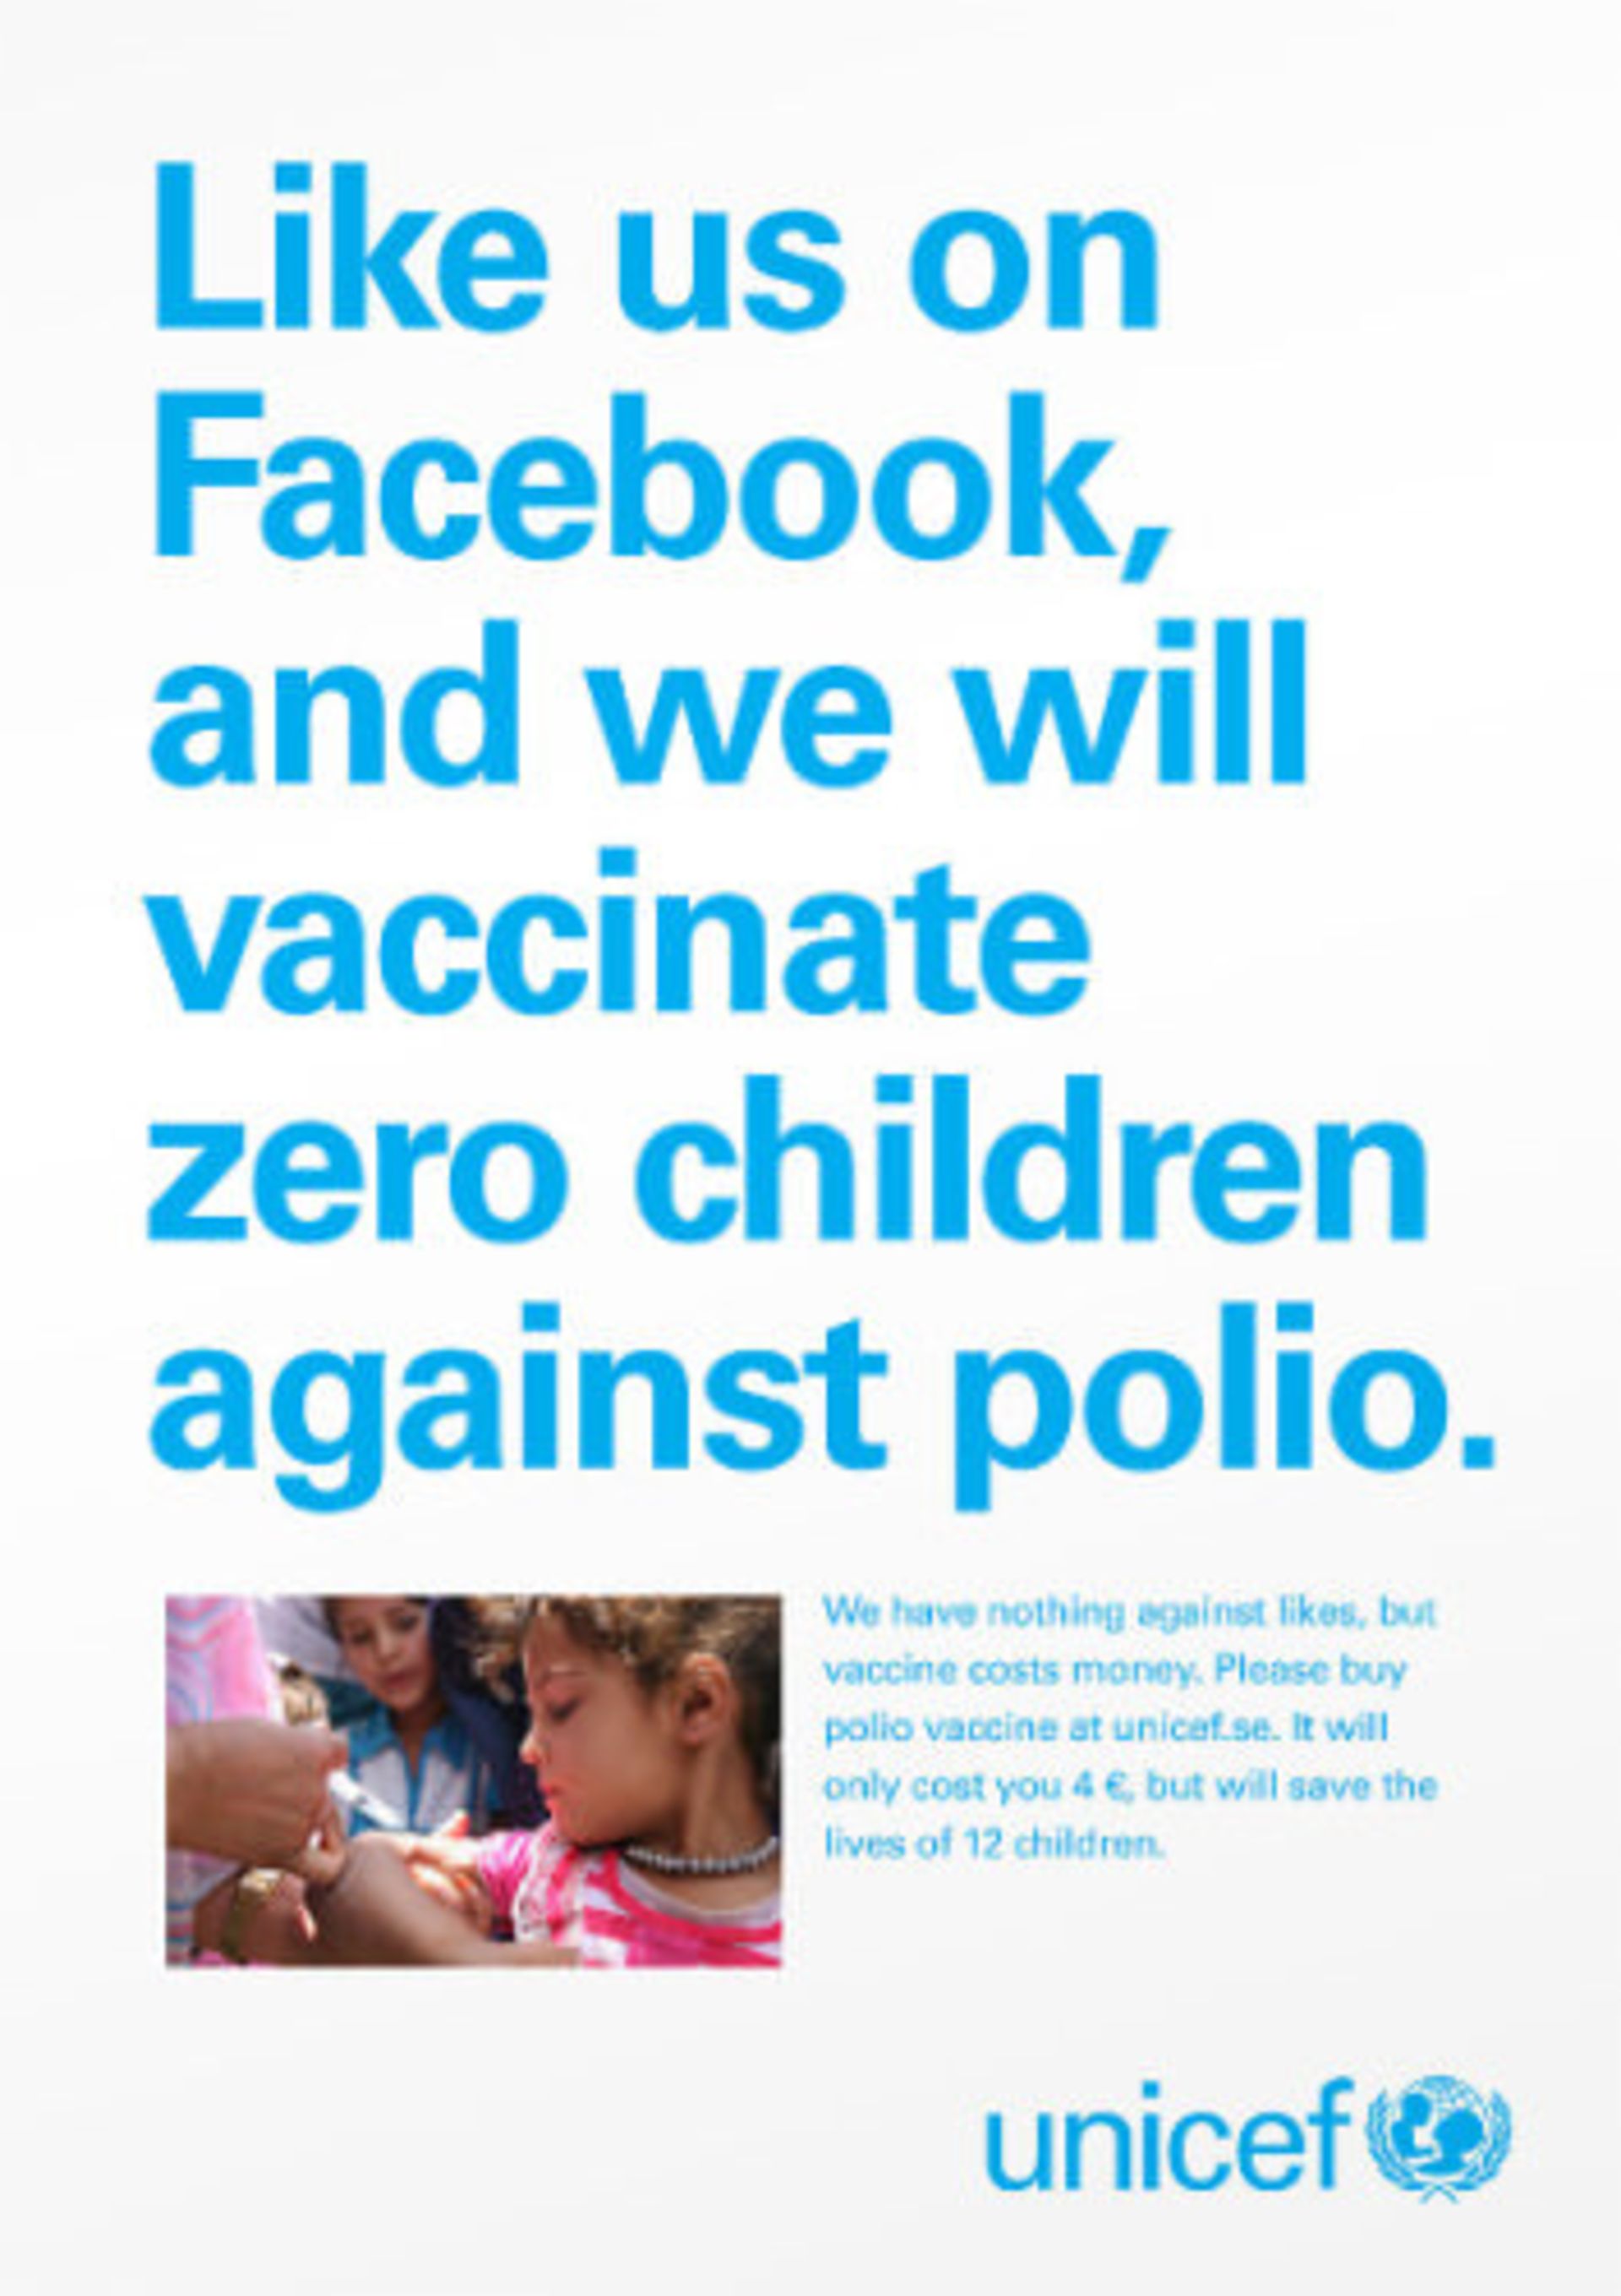 unicef-poster-353x500